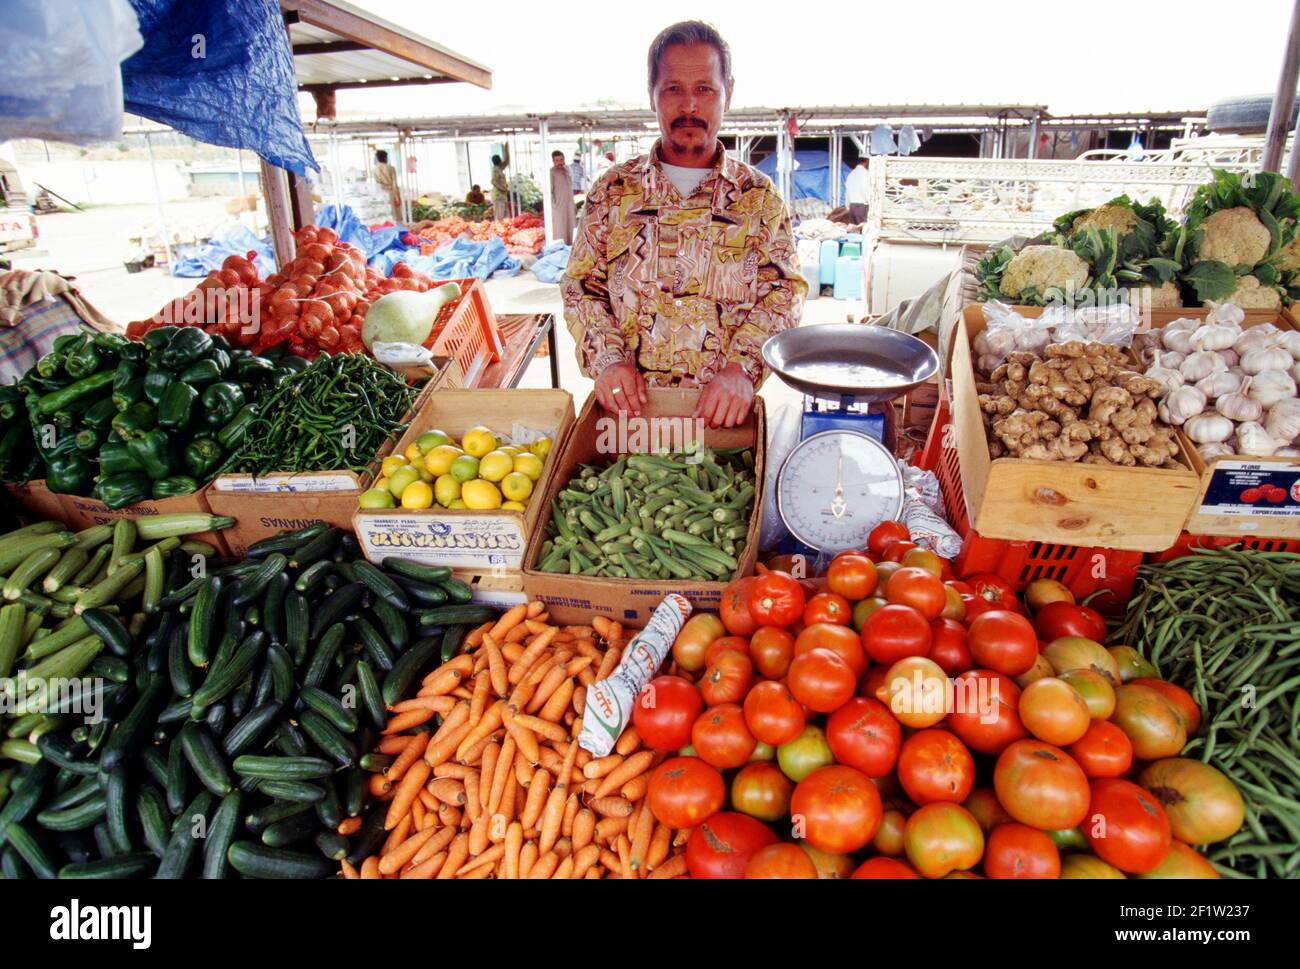 Fresh produce for sale at a farmers market in the Asir Region of the Kingdom of Saudi Arabia Stock Photo